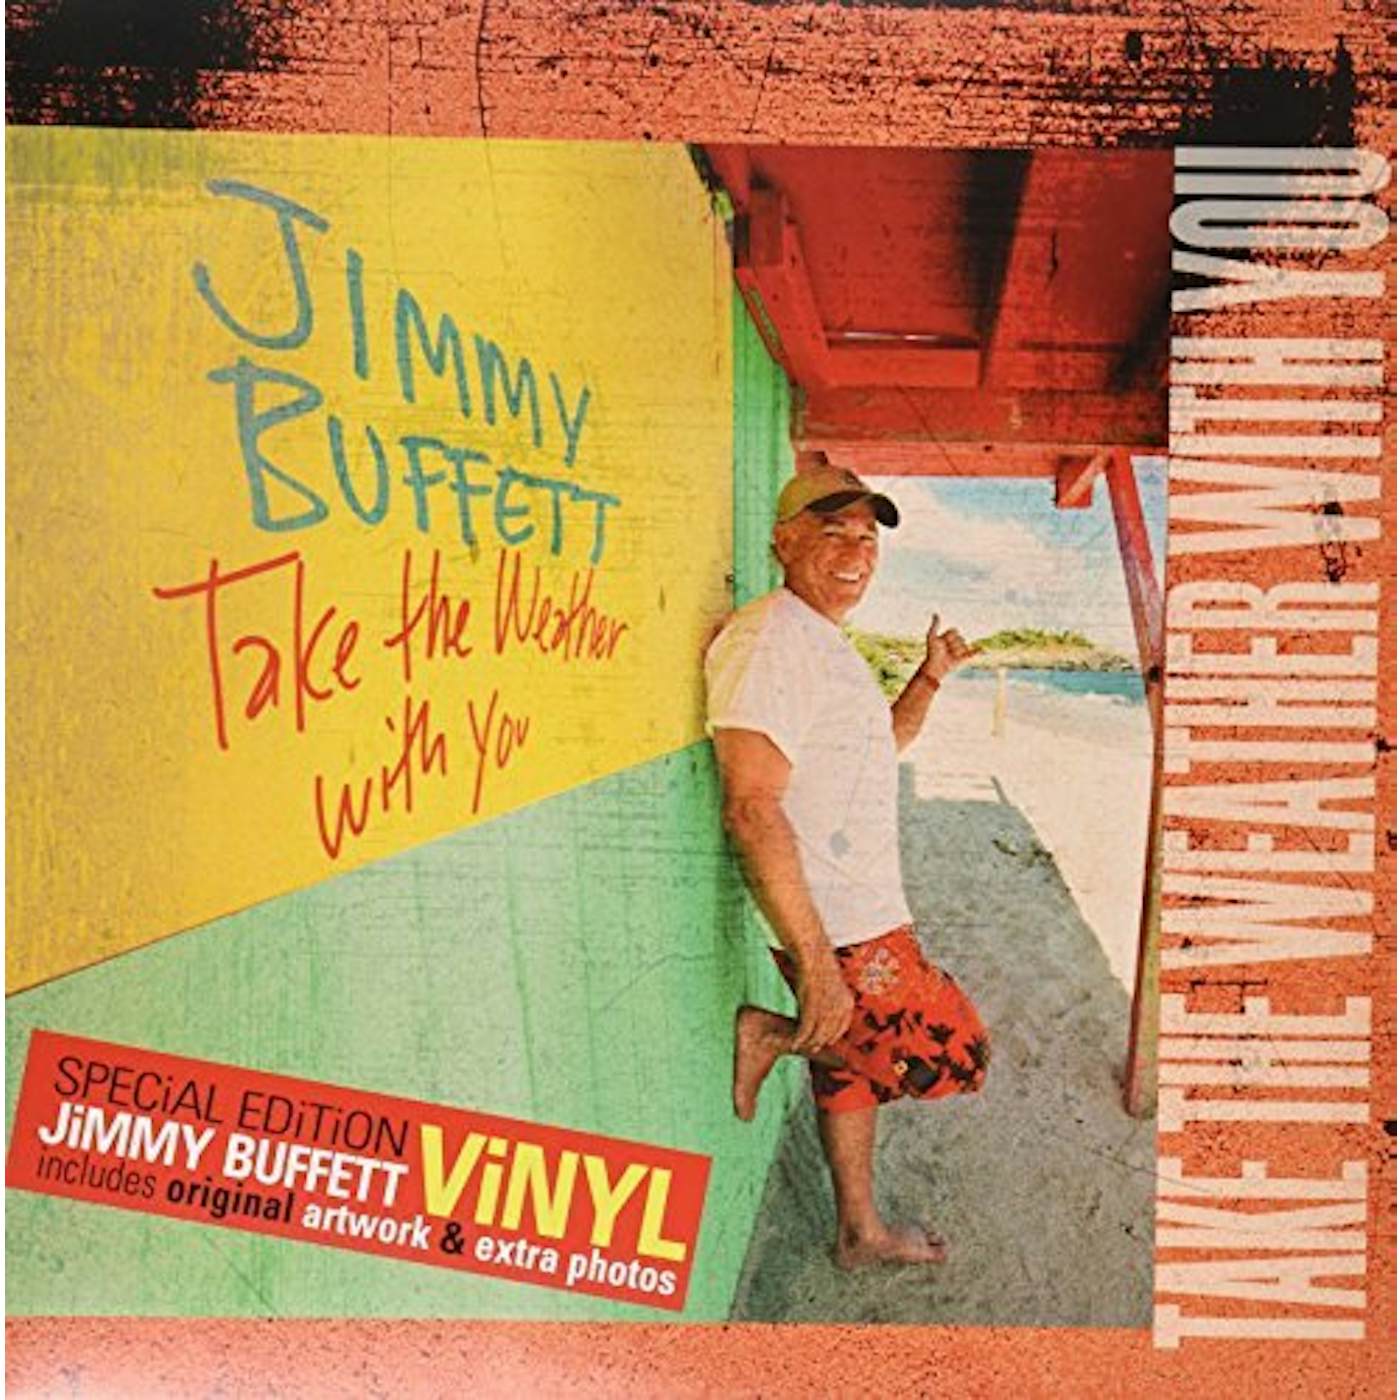 Jimmy Buffett Take the Weather with You Vinyl Record